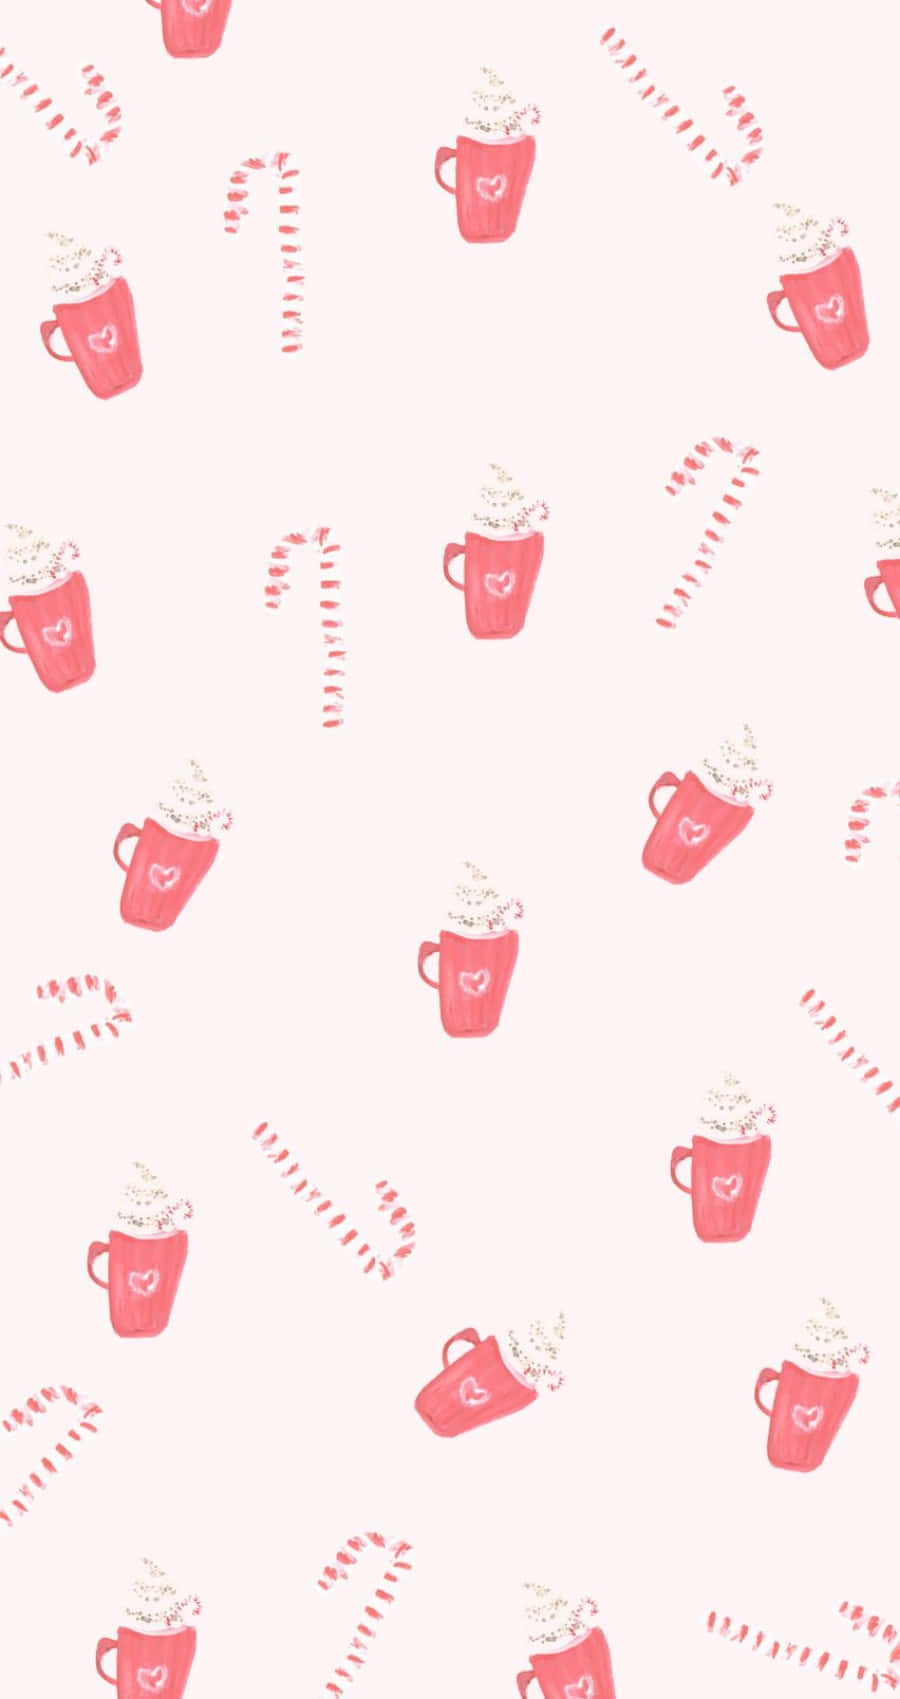 Celebrate Christmas in a cute and pink way! Wallpaper